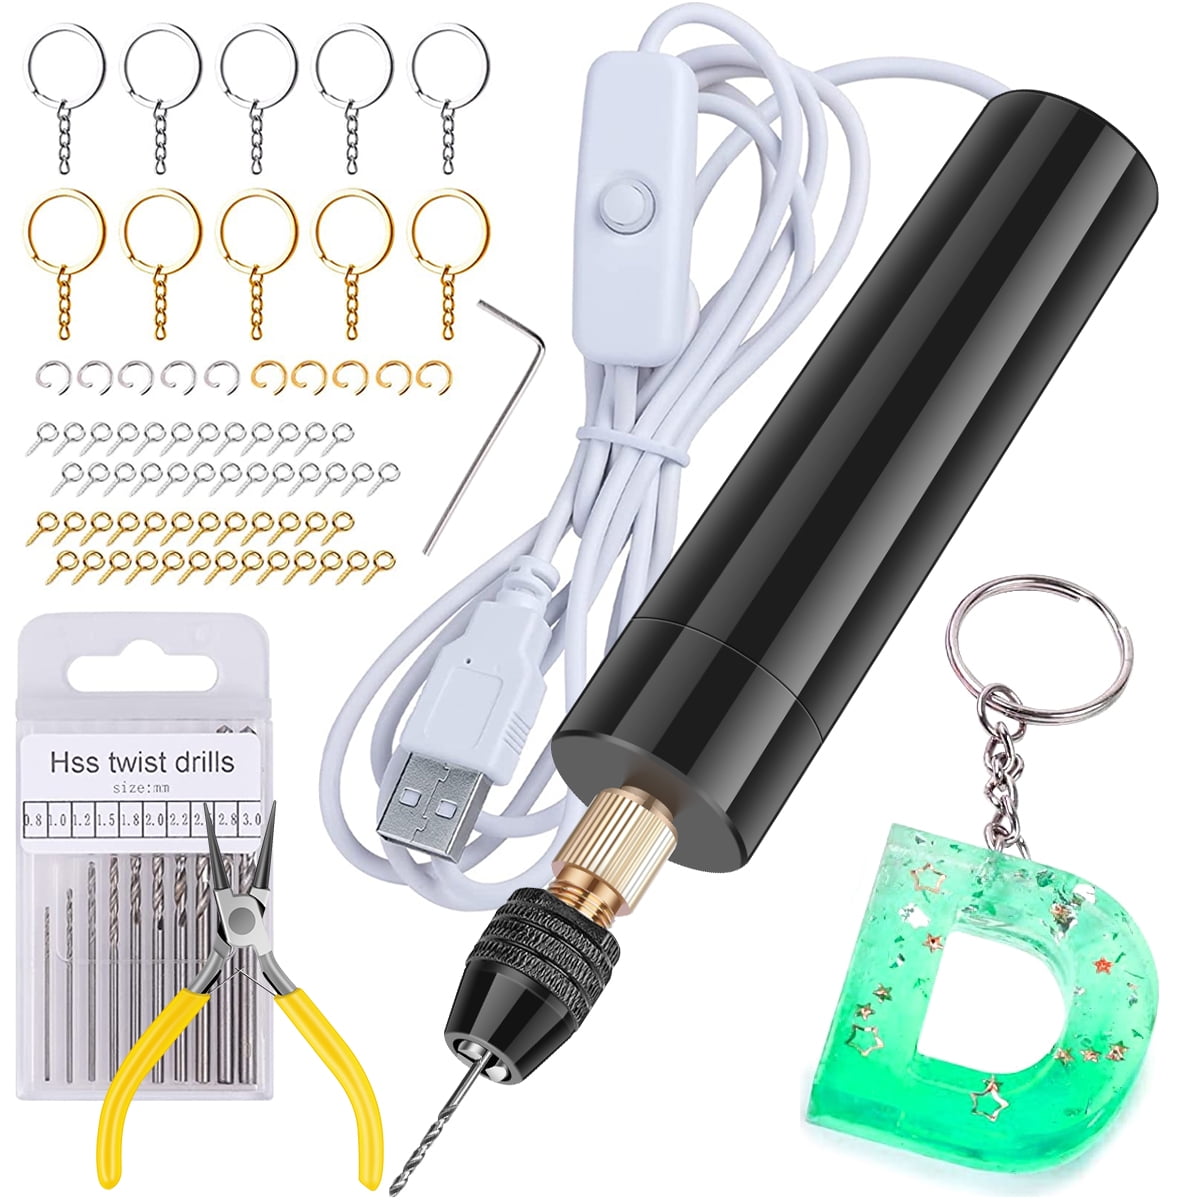 Electric Cordless USB Rechargable Hand Drill Kit for Jewelry Making,Pin  Vise Set for Resin Plastic Keychain Polymer Clay